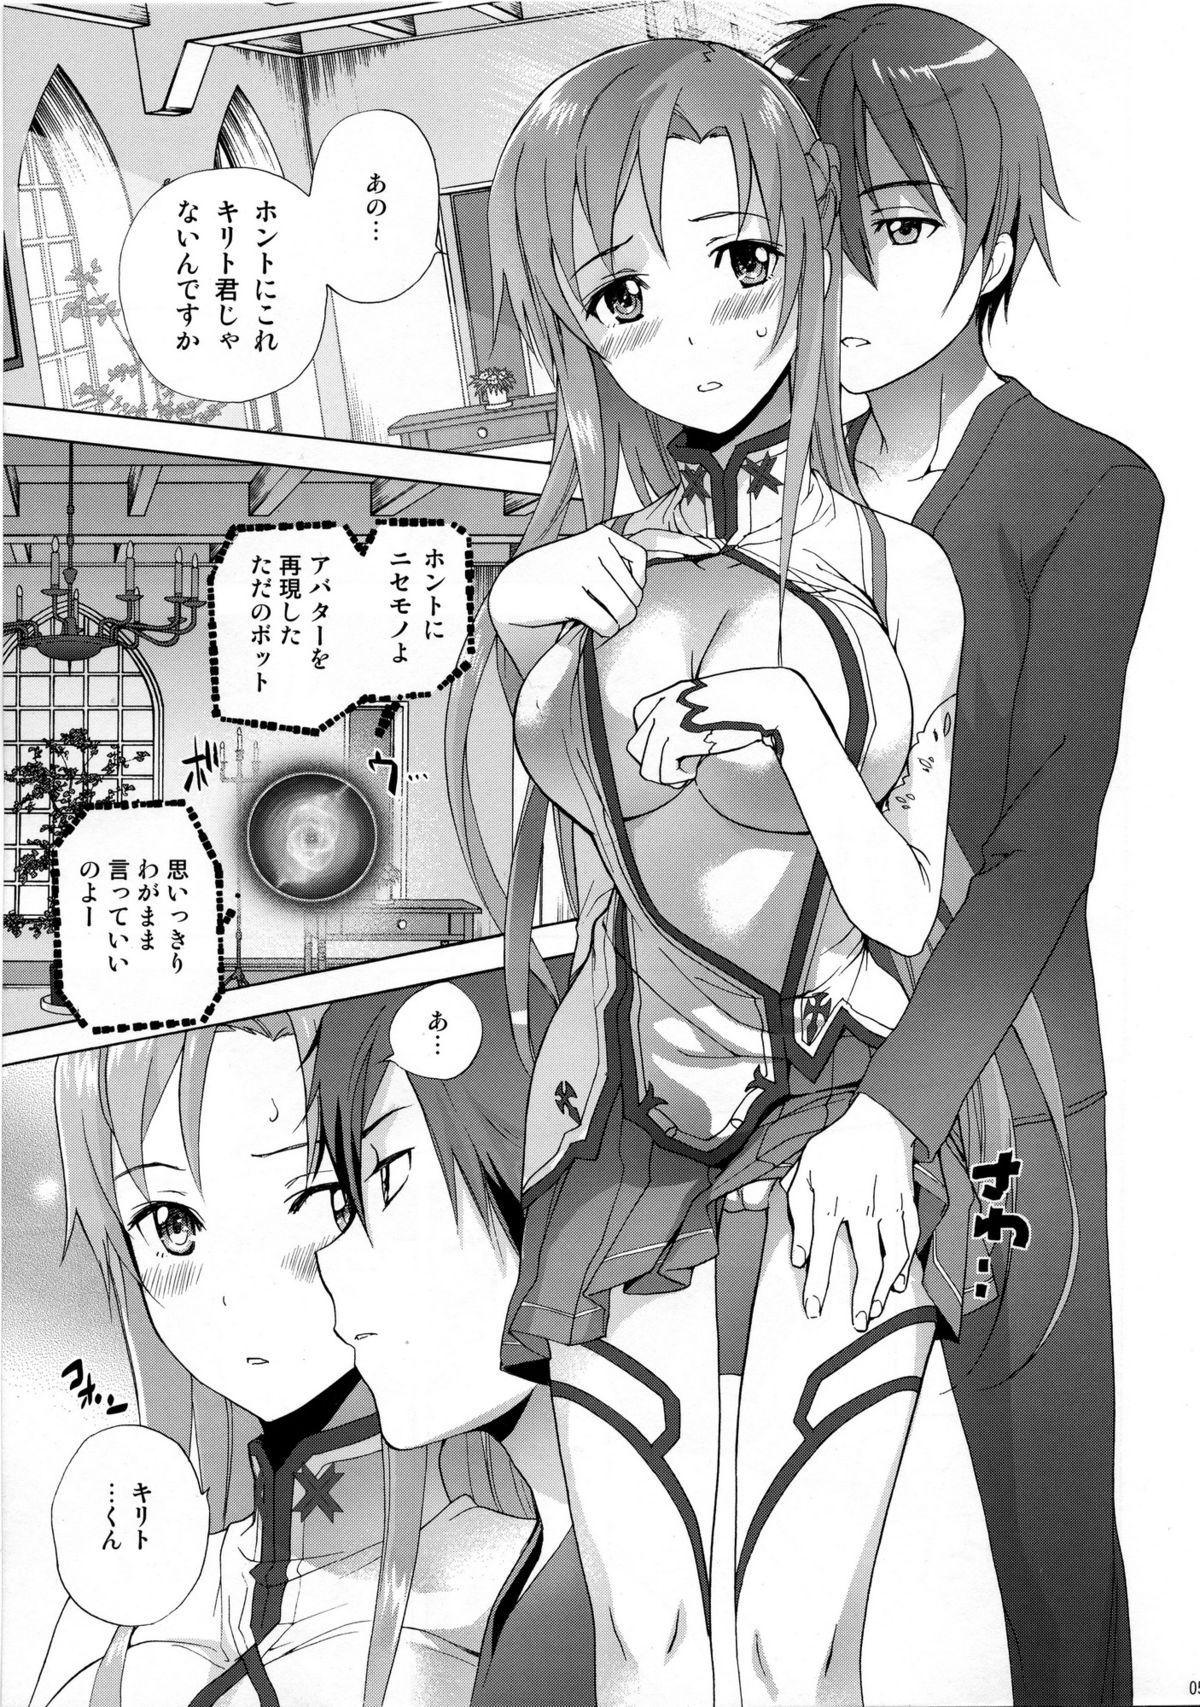 Lima ASUNA' HOLE - Sword art online Clothed Sex - Page 4